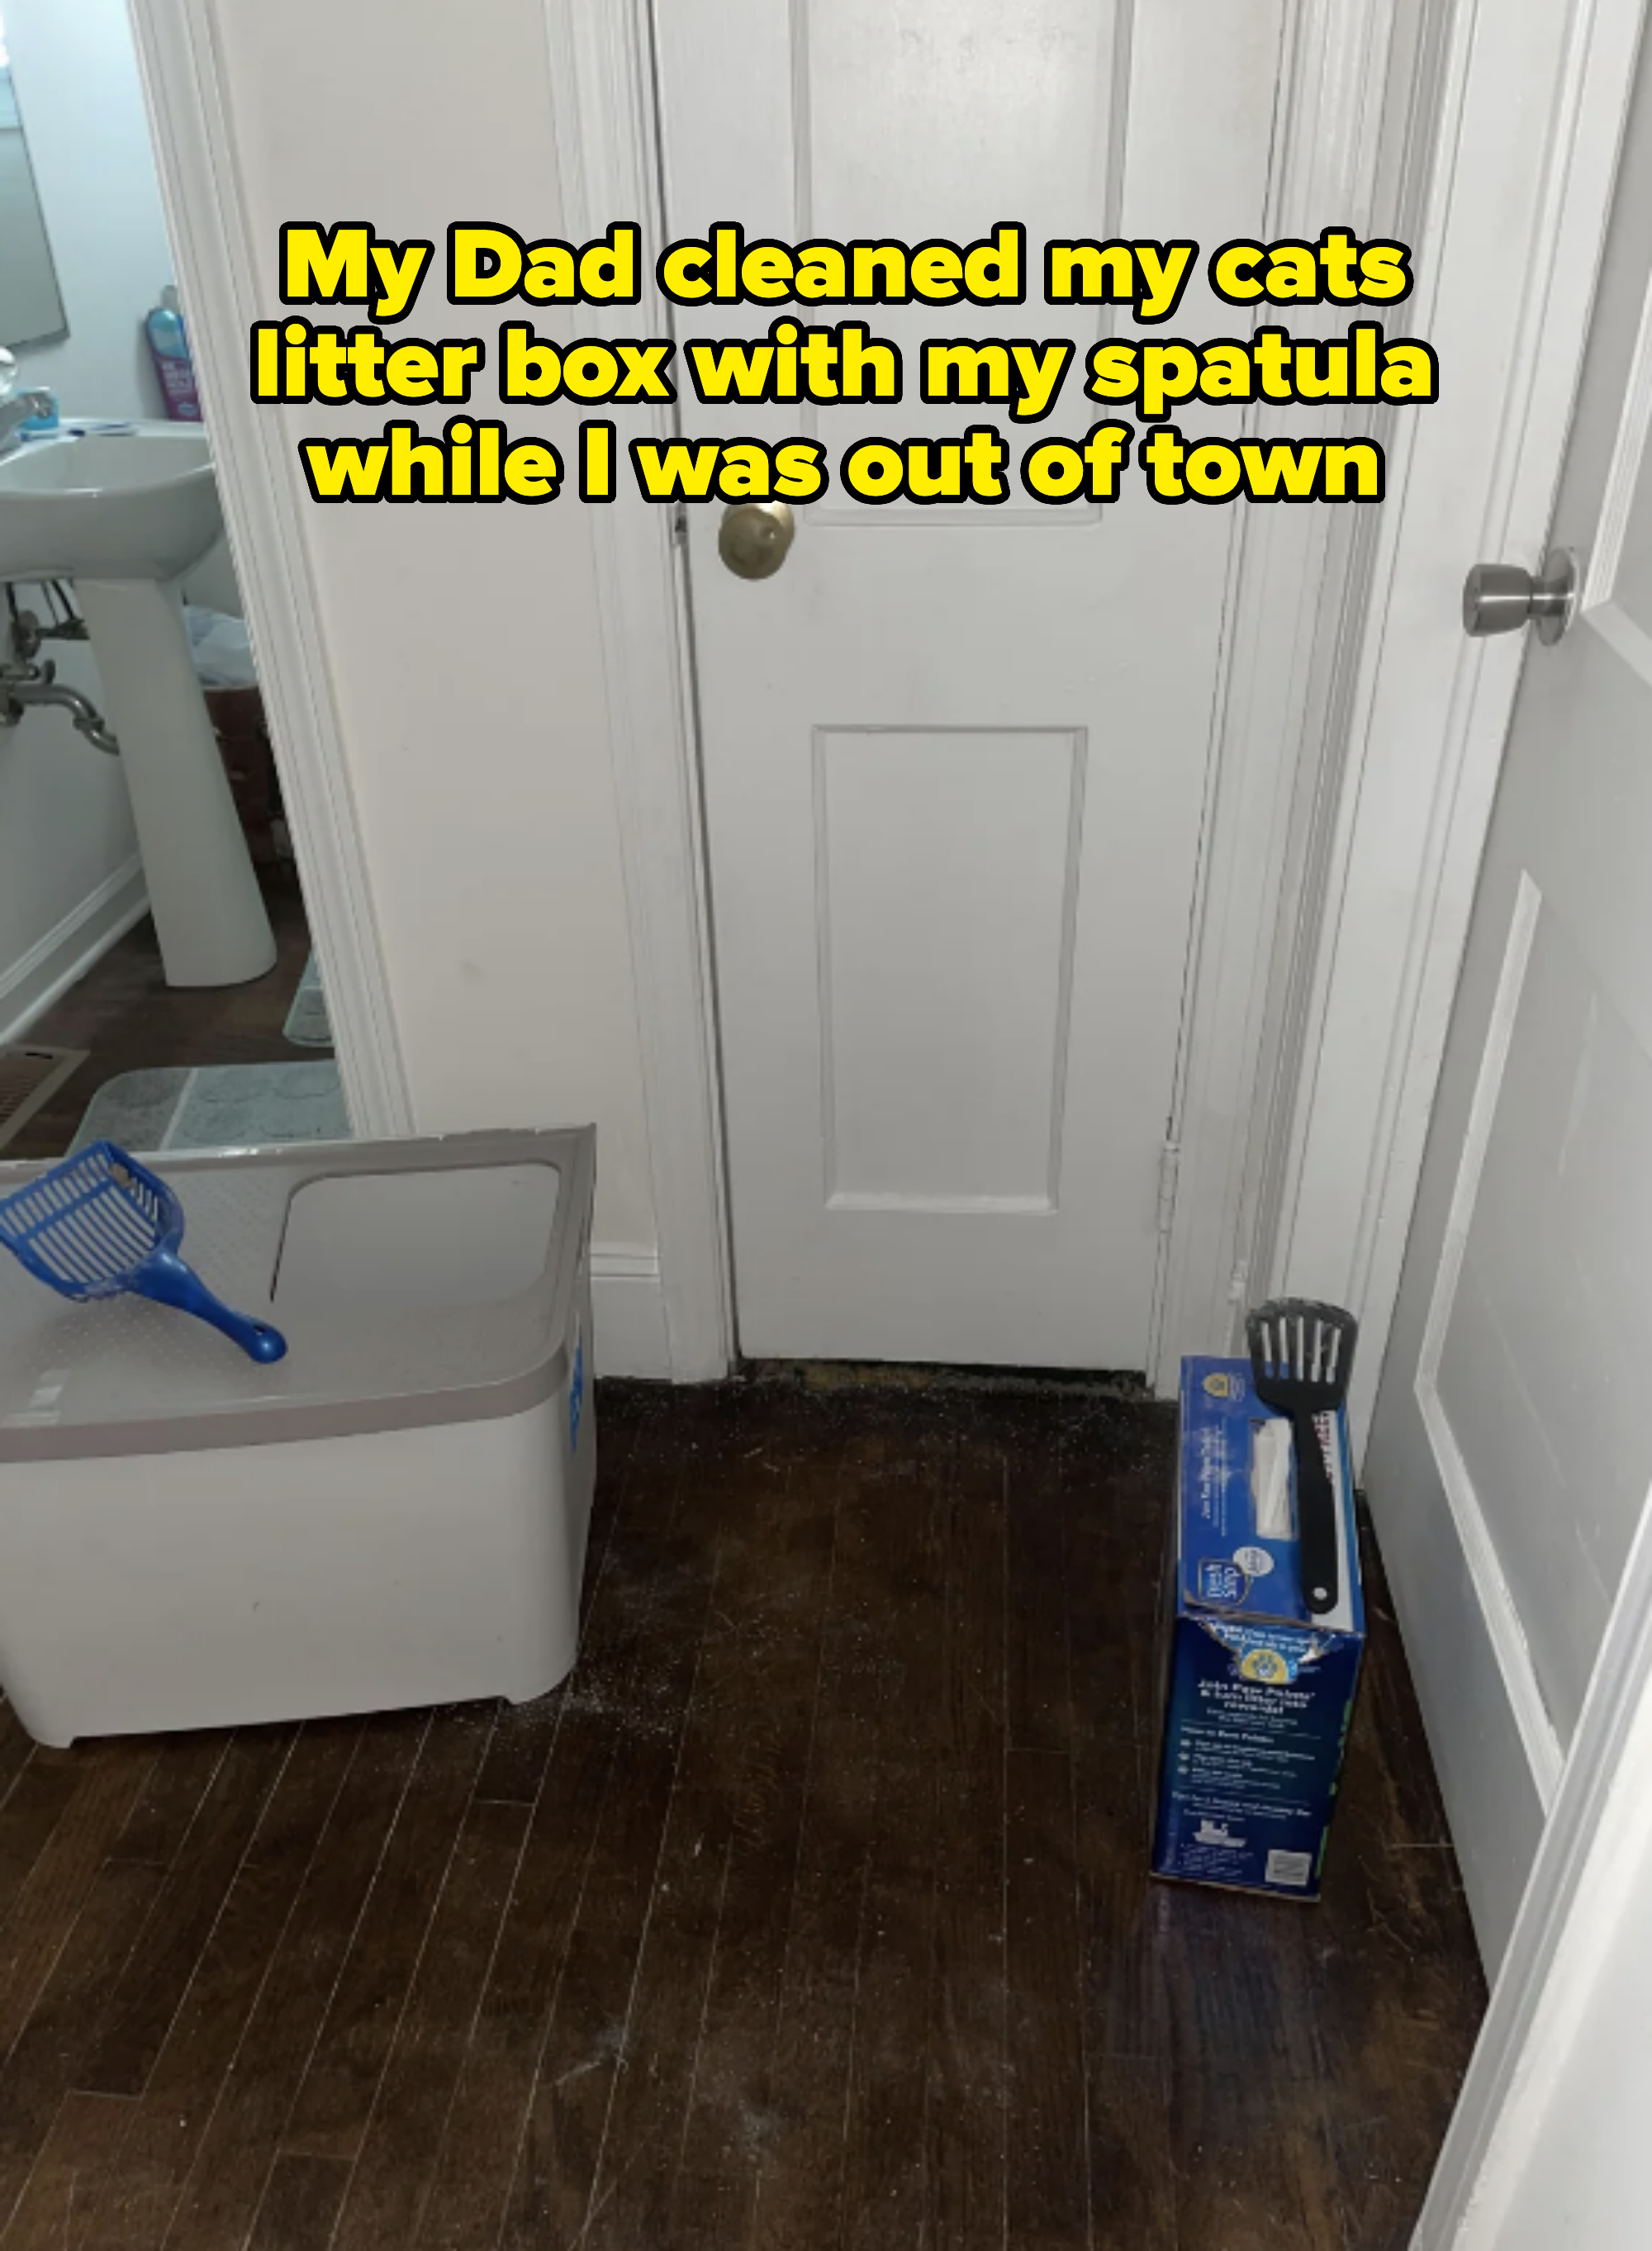 A hallway with wooden floors. A litter box with a scoop is on the left, and a box of cat litter with a scoop stands against the wall on the right